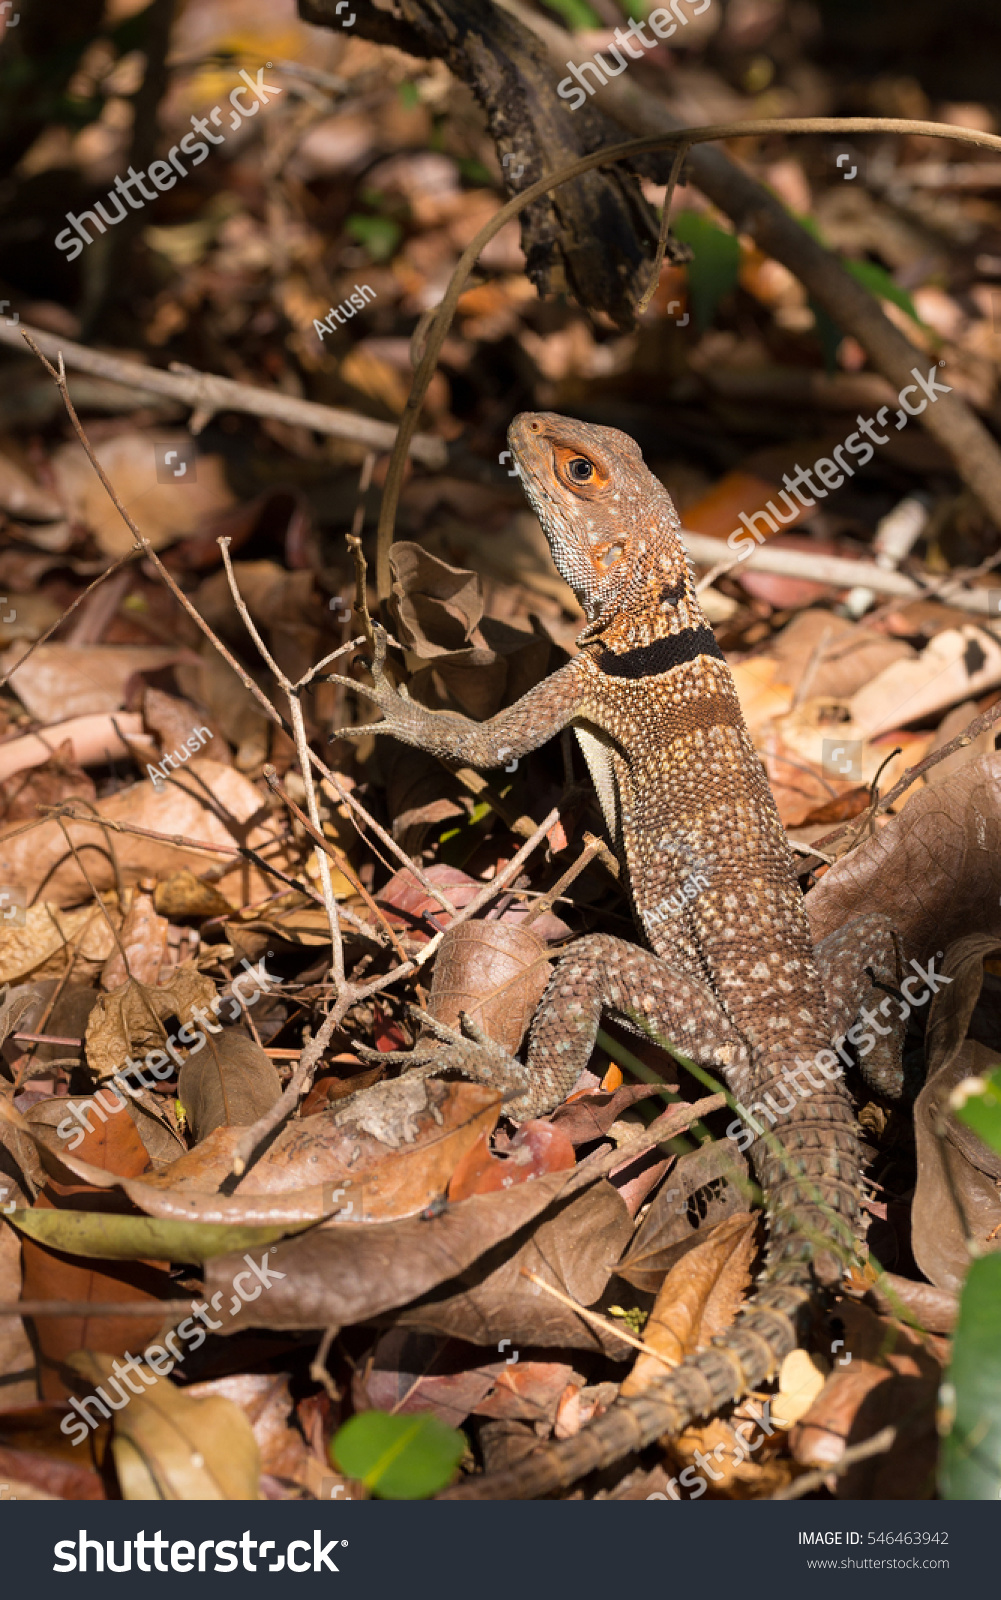 Oplurus cuvieri, commonly known as the collared iguanid lizard, collared iguana, or Madagascan collared iguana. Ankarafantsika National Park, Madagascar wildlife and wilderness #546463942